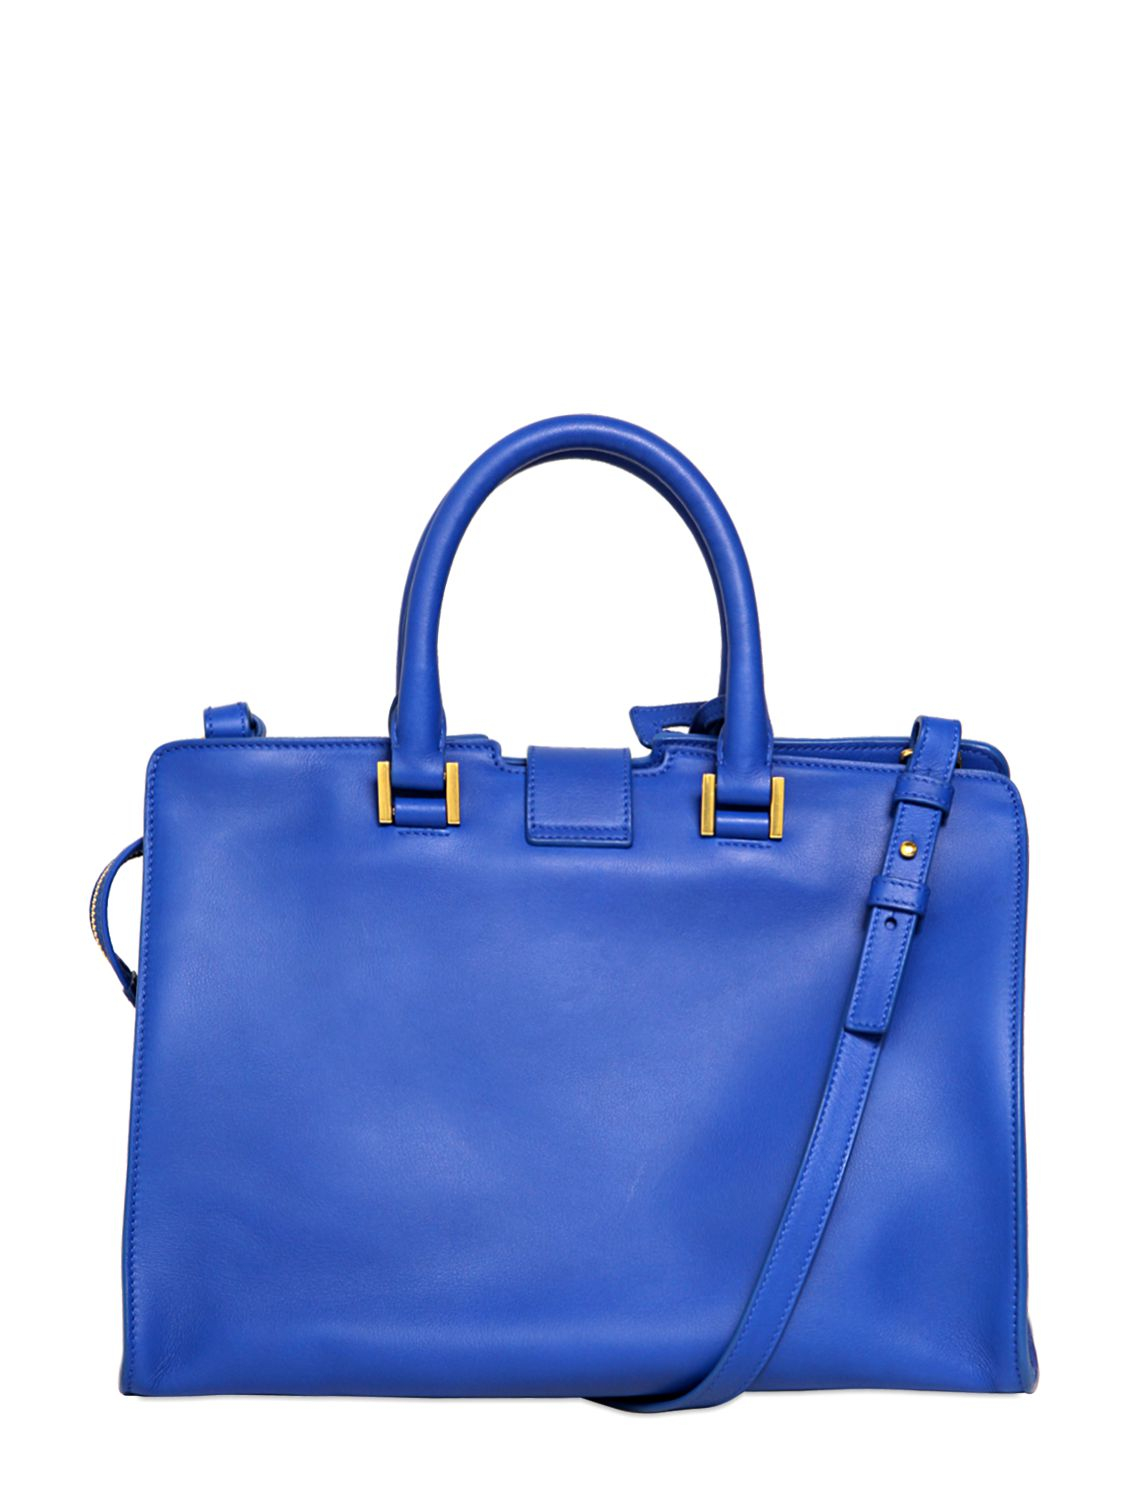 Saint Laurent Small Cabas Y Brushed Leather Bag in Blue - Lyst